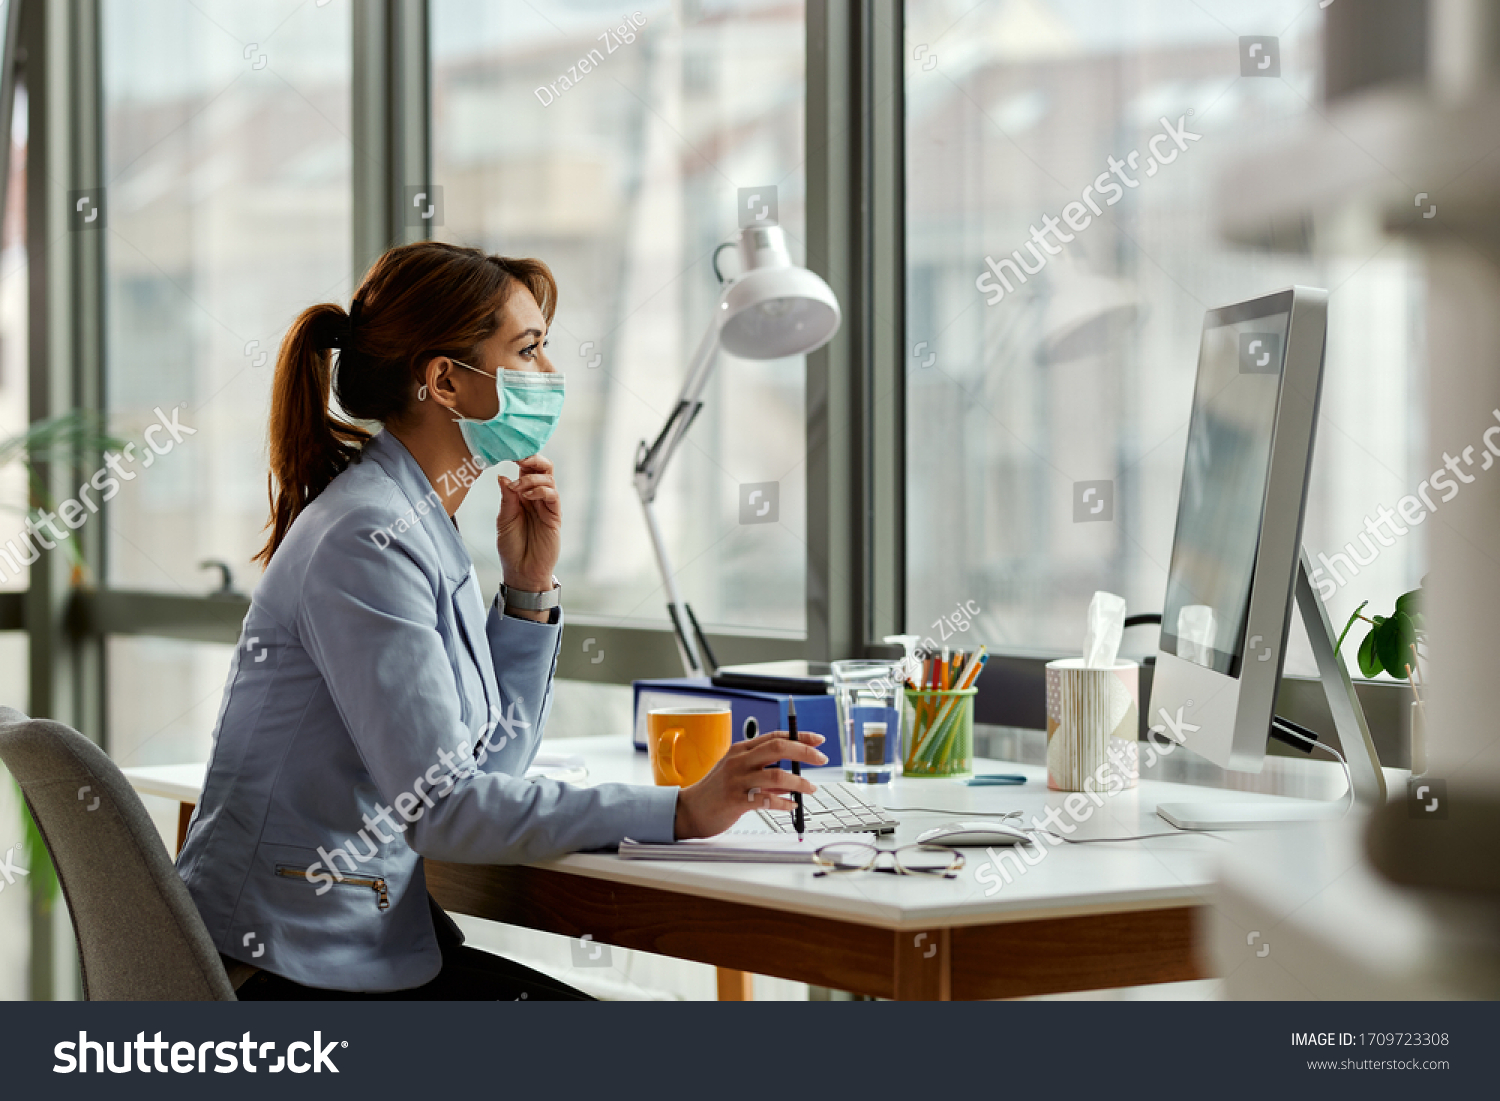 Young businesswoman wearing face mask while working on a computer in the office.  #1709723308